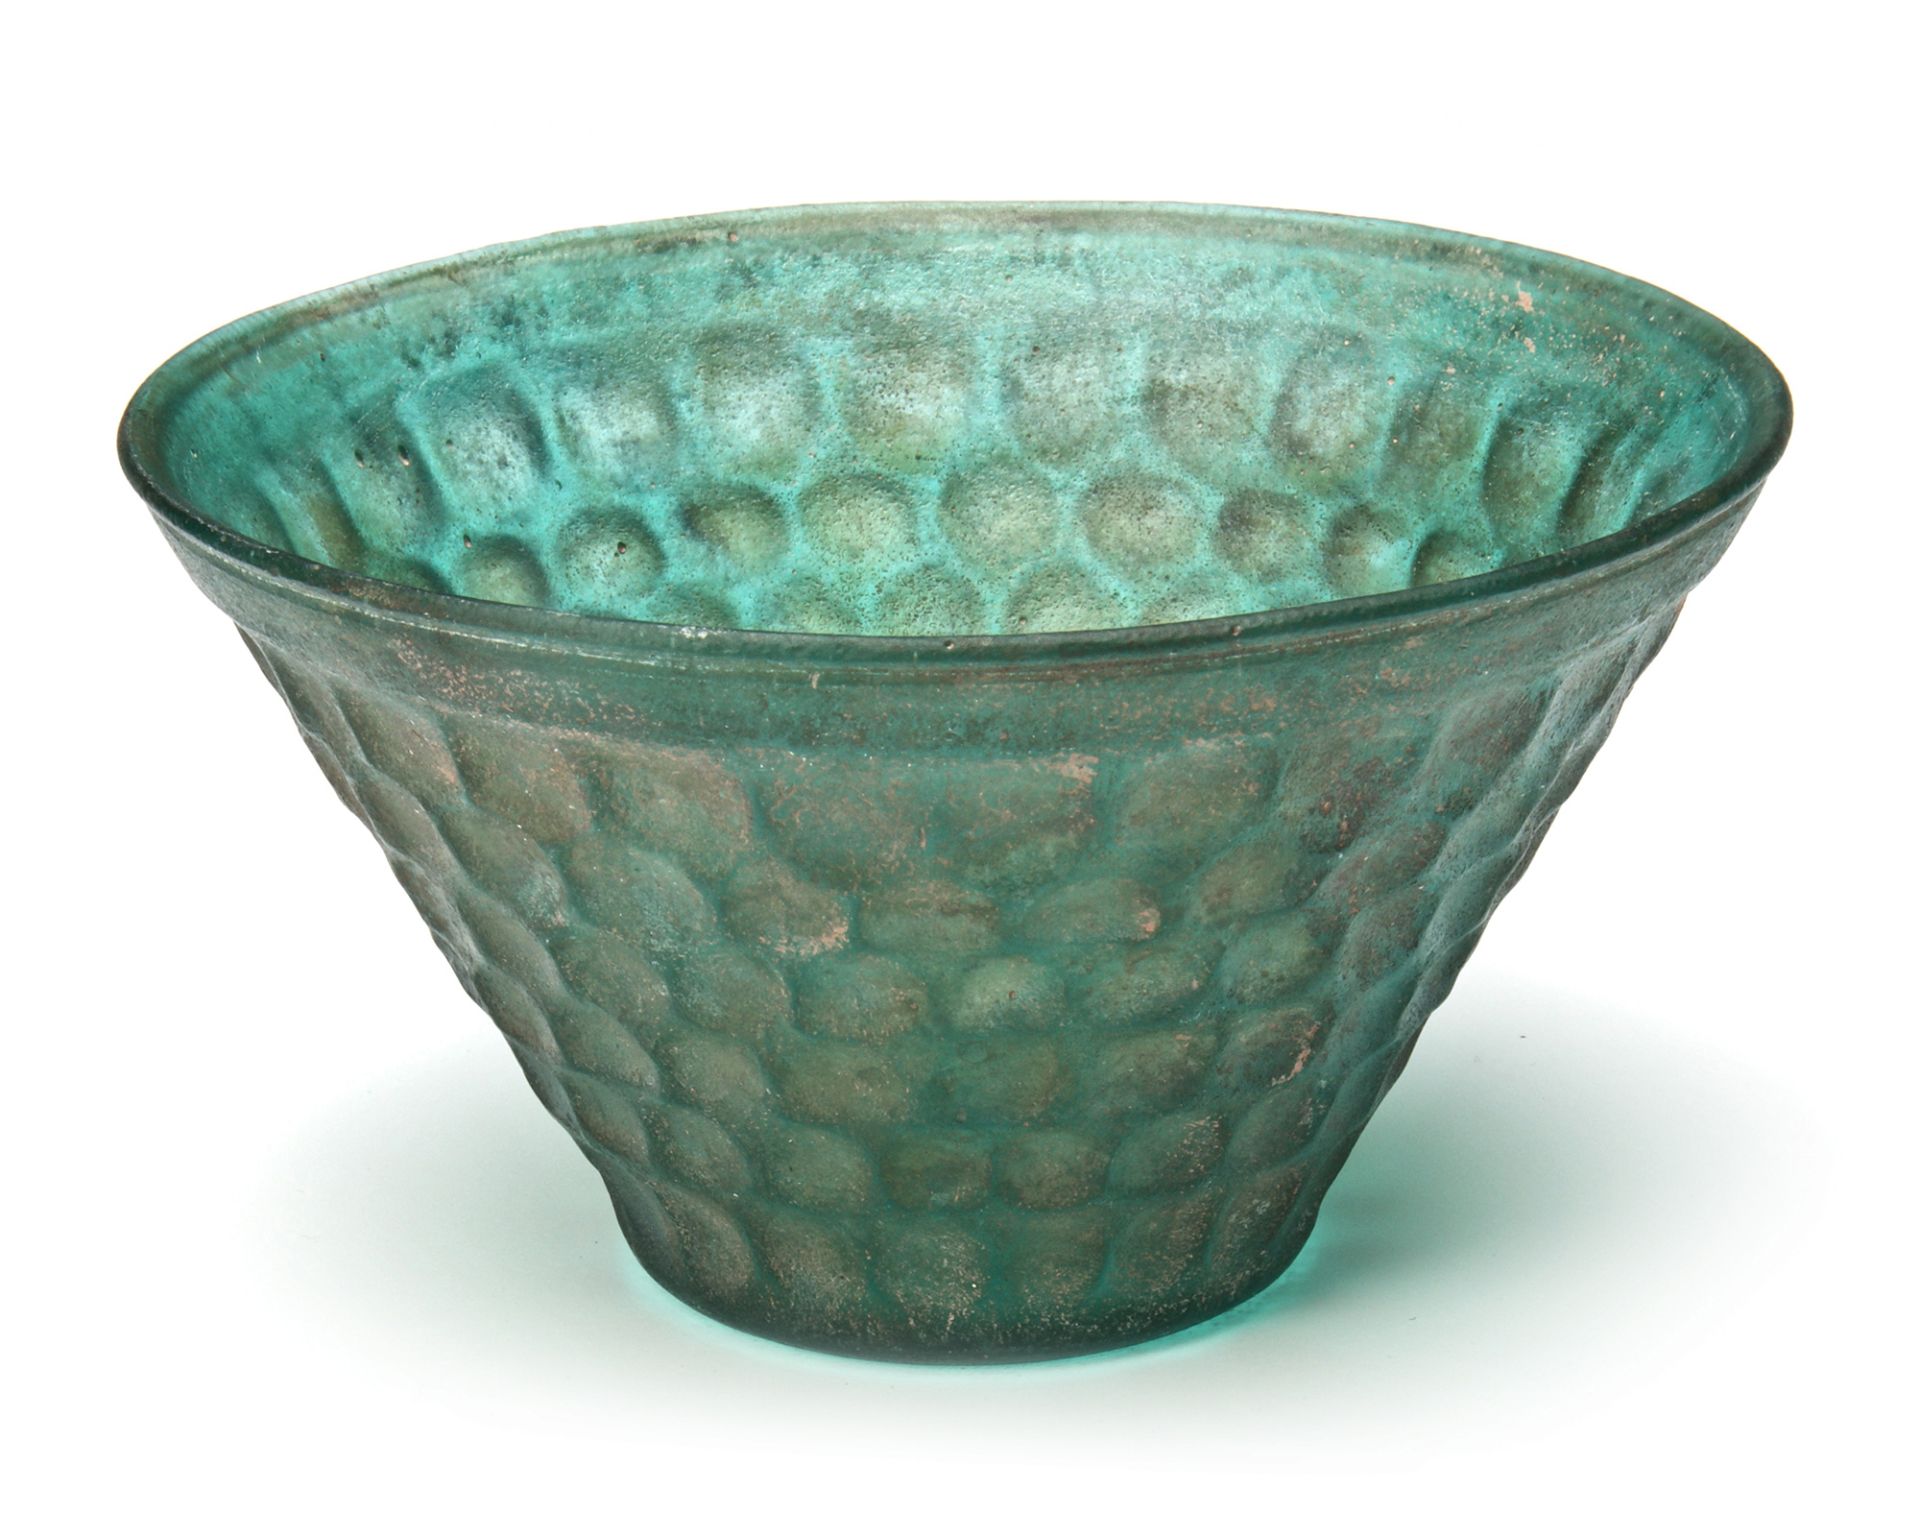 A PERSIAN GREEN CUT GLASS BOWL, 8TH-9TH CENTURY - Image 8 of 10